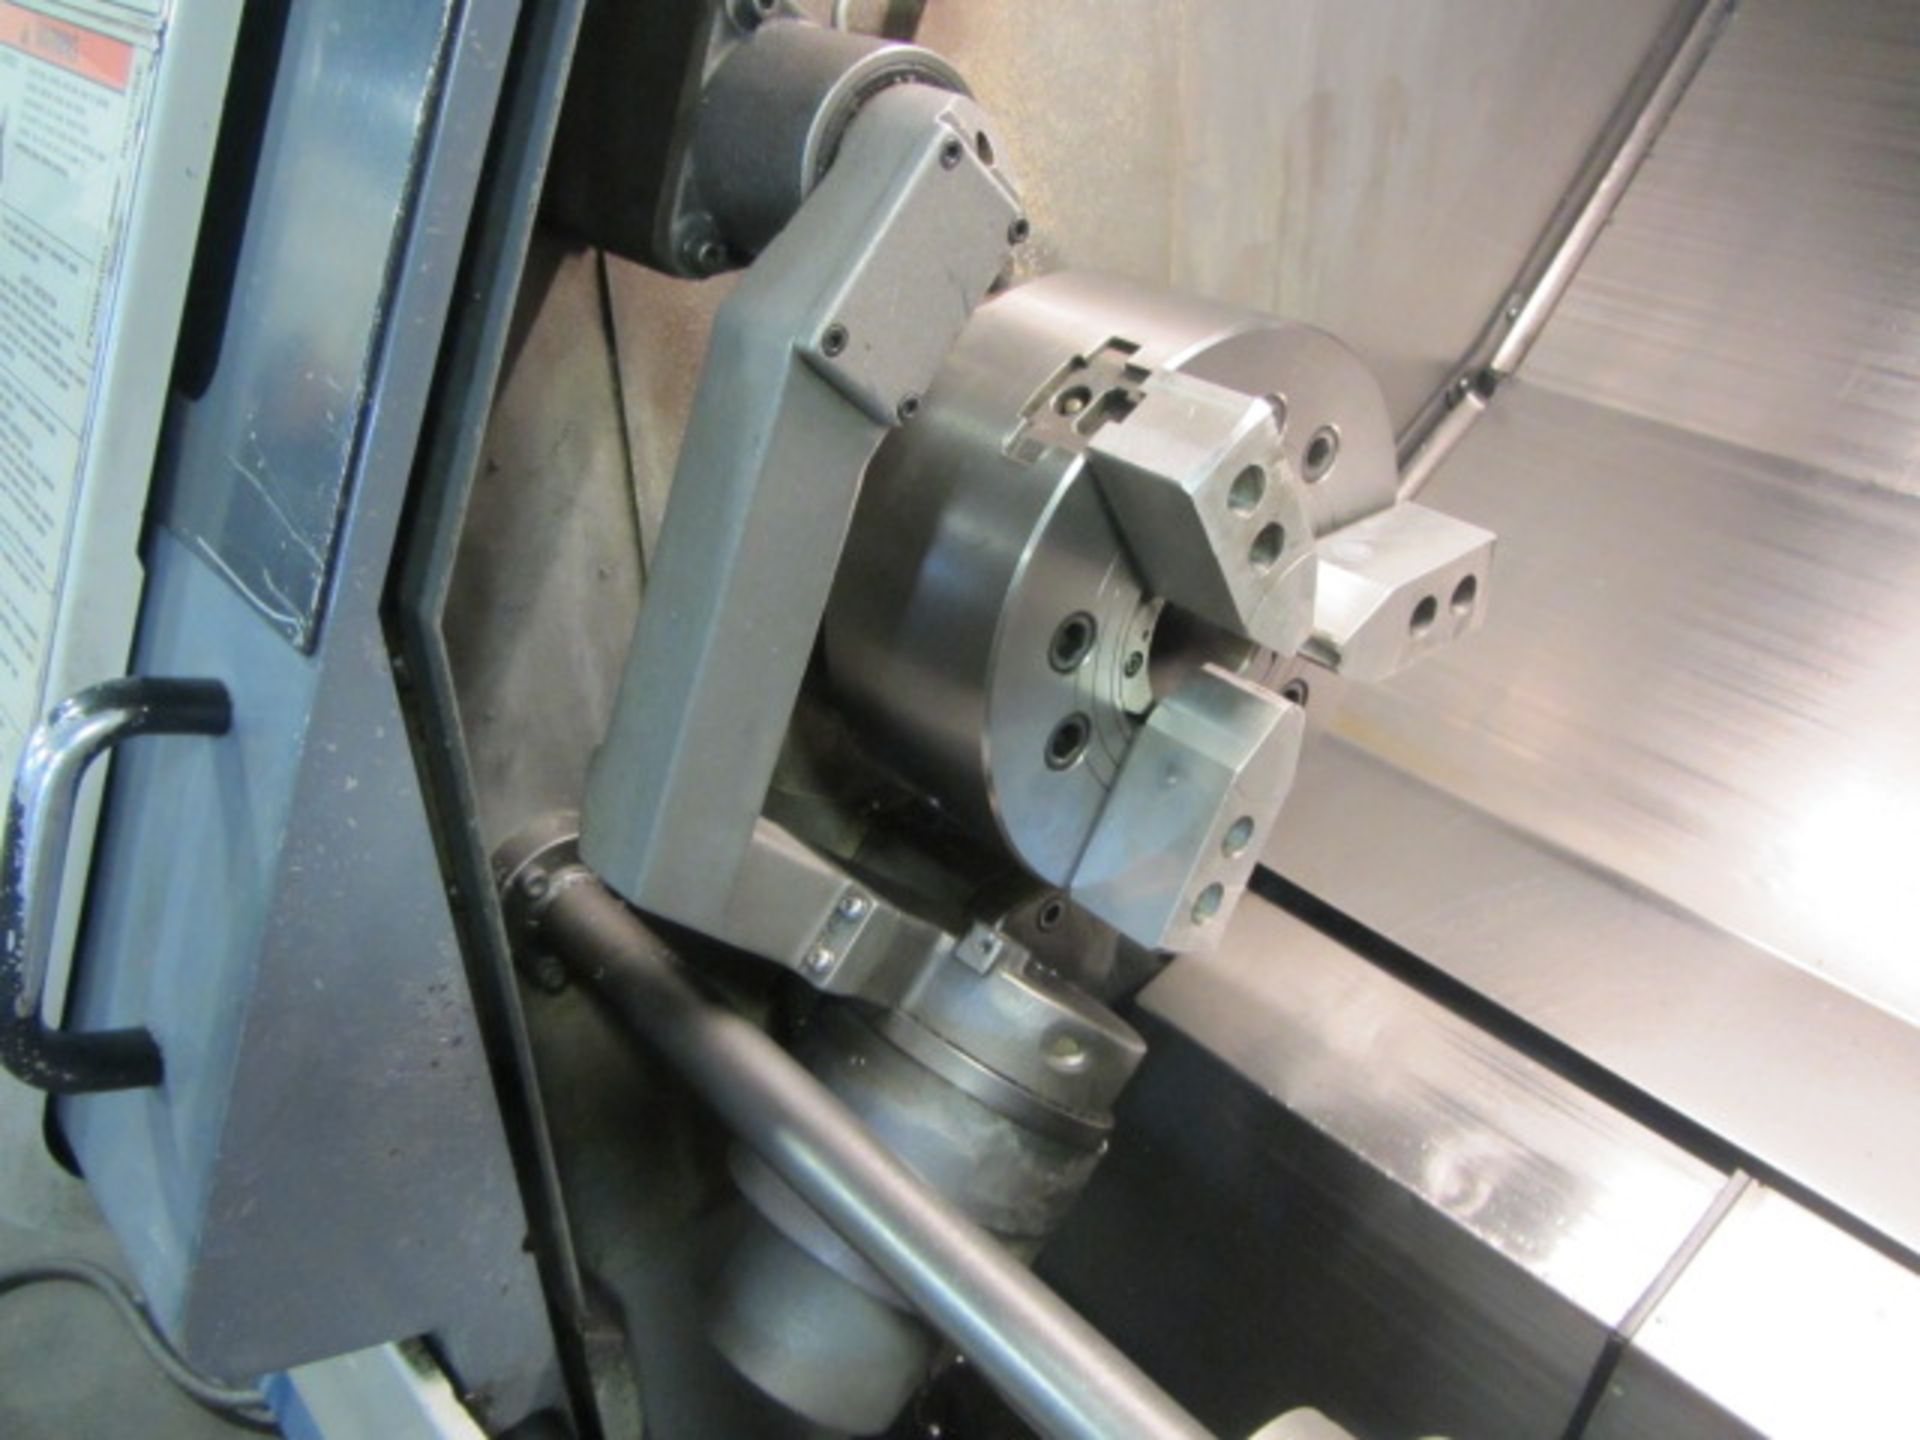 Mazak Super Quick Turn 250-MSY CNC Turning Center with Sub-Spindle, Milling & Y-Axis, 12 Position - Image 7 of 8